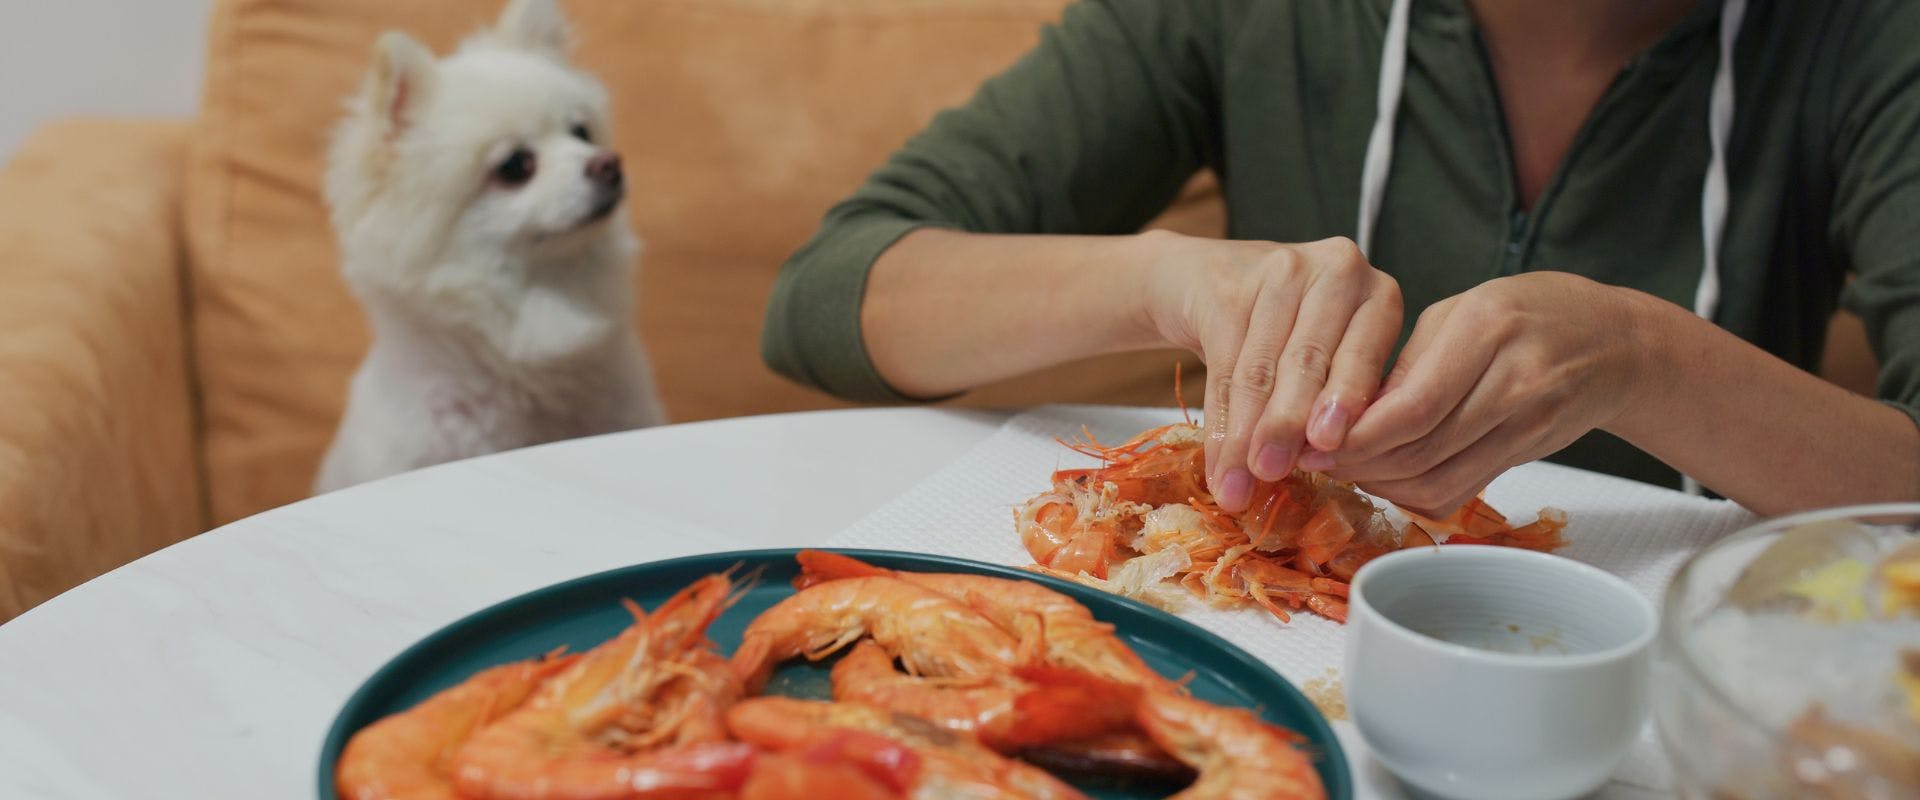 Person peeling shrimp with a white dog in the background